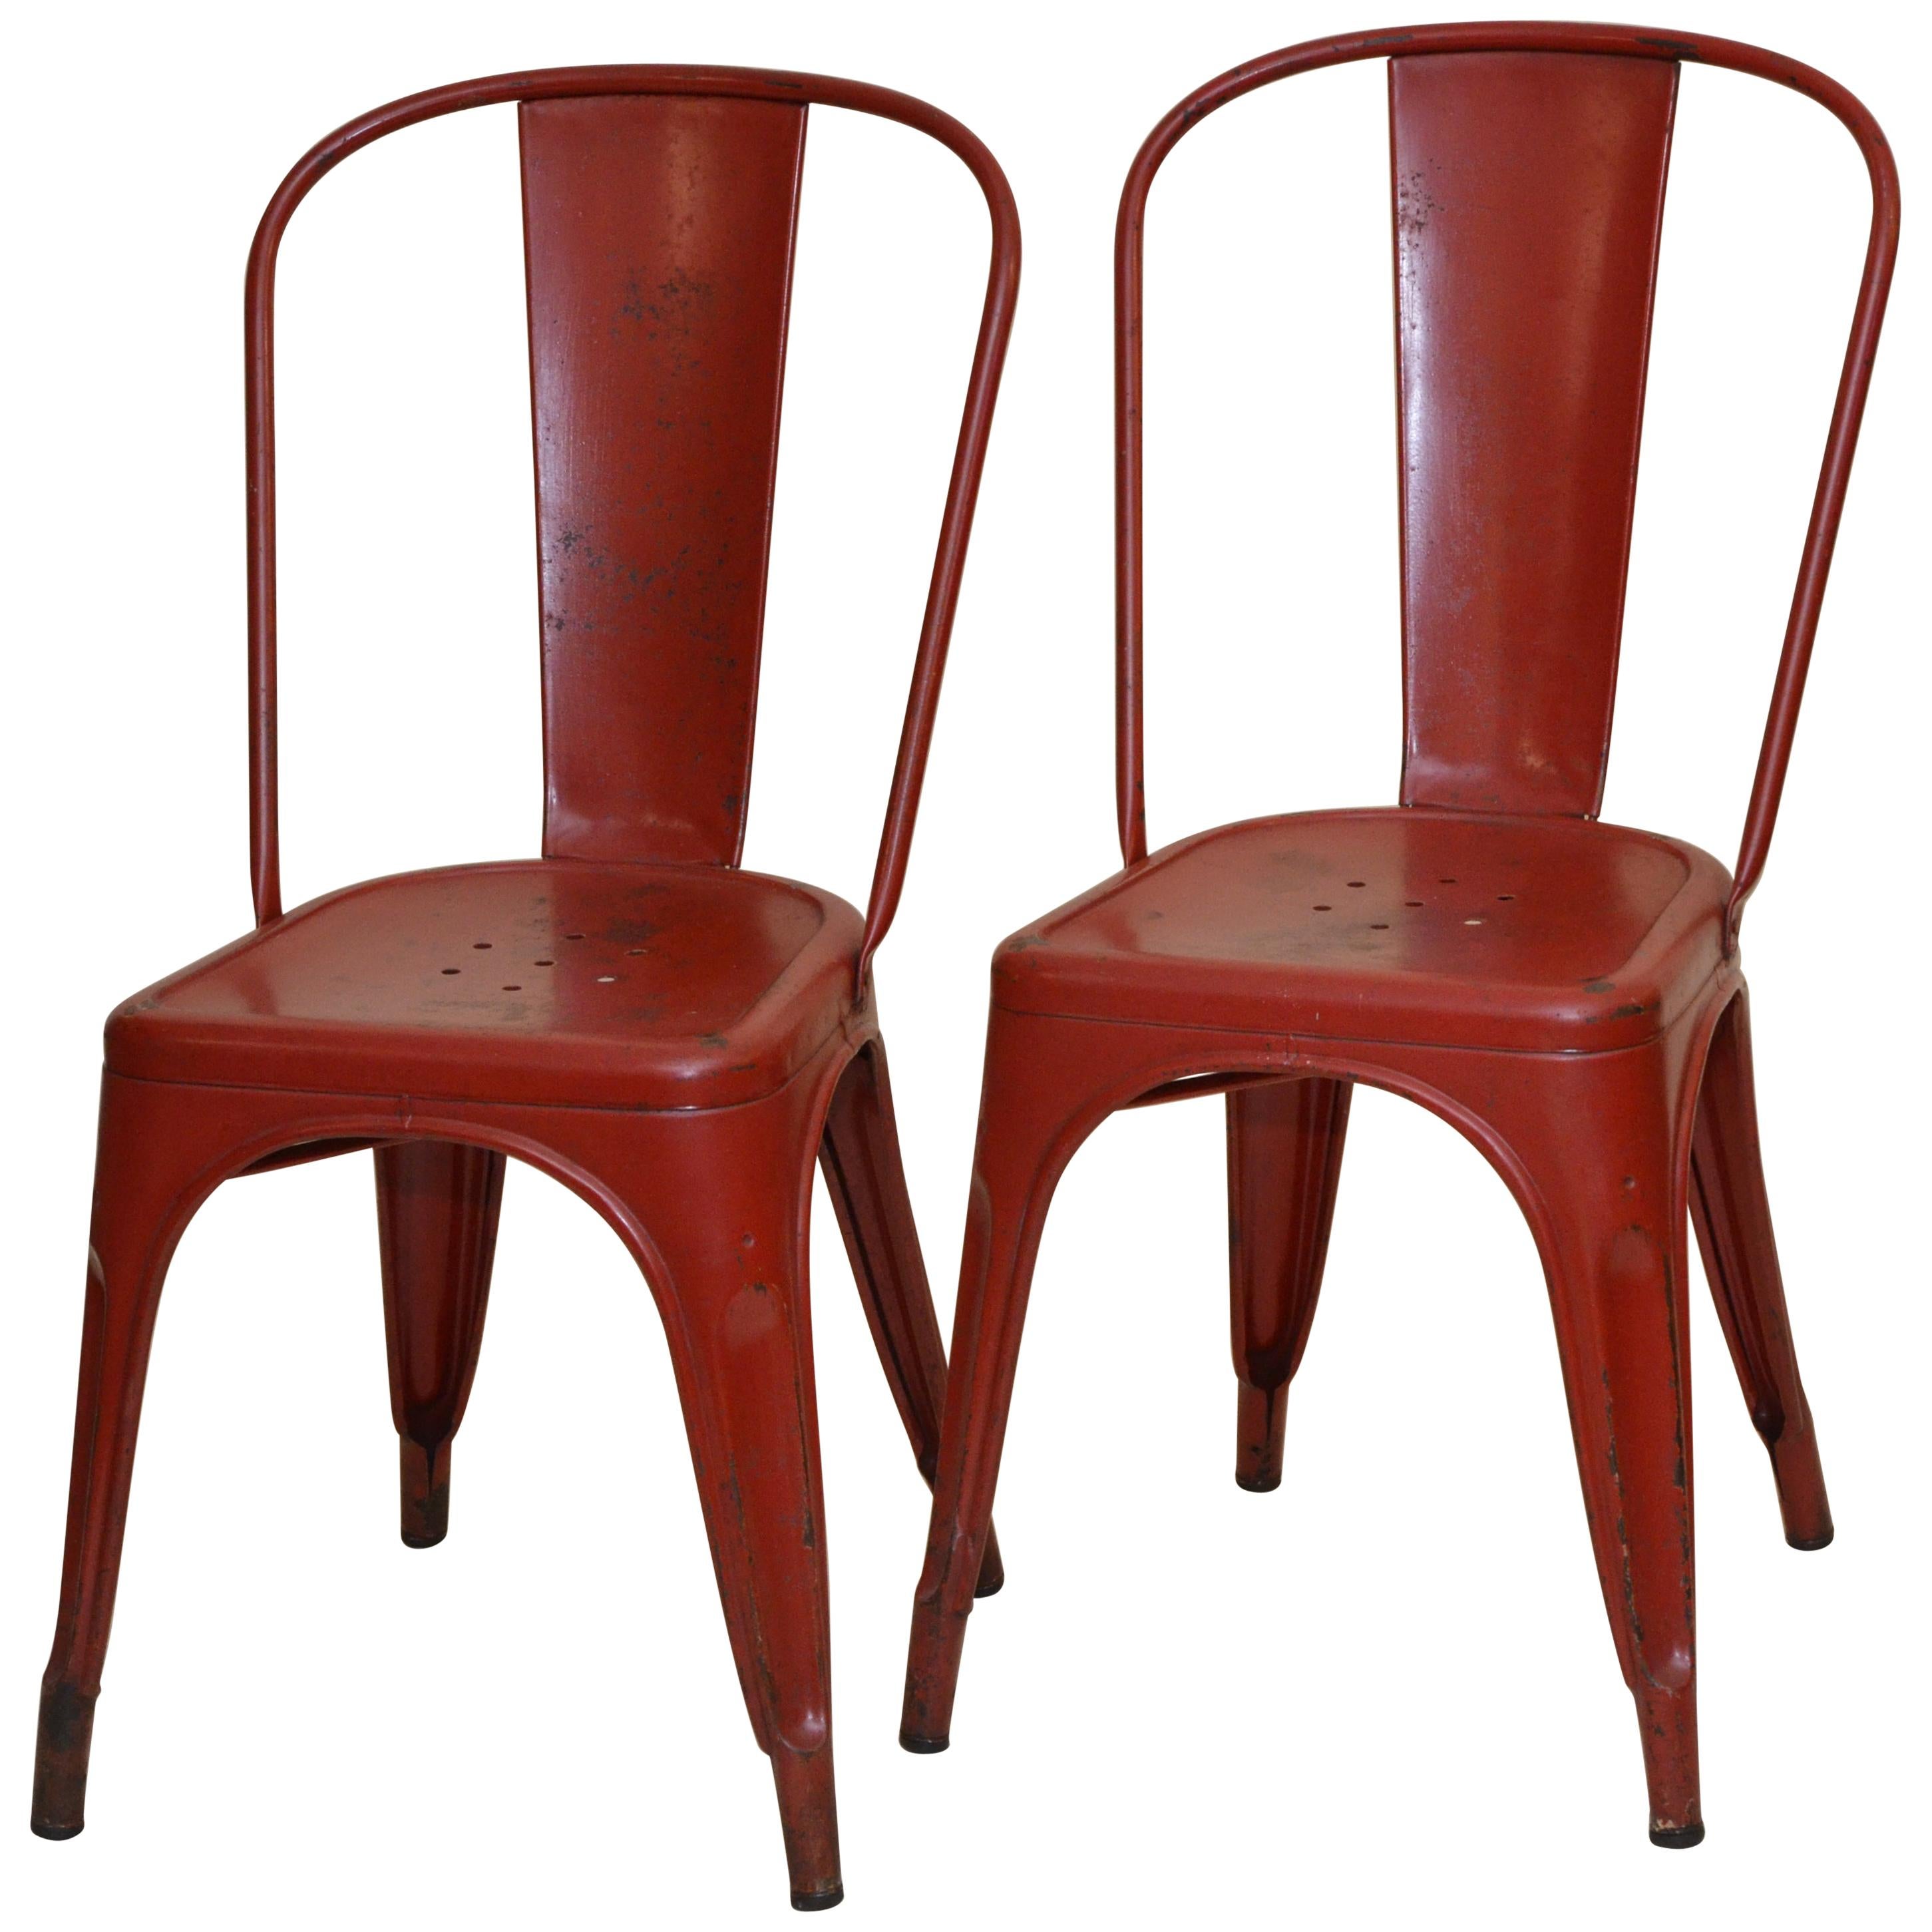 1950s Xavier Pauchard Pair of Industrial Vintage Red Metal French Chairs, Tolix For Sale